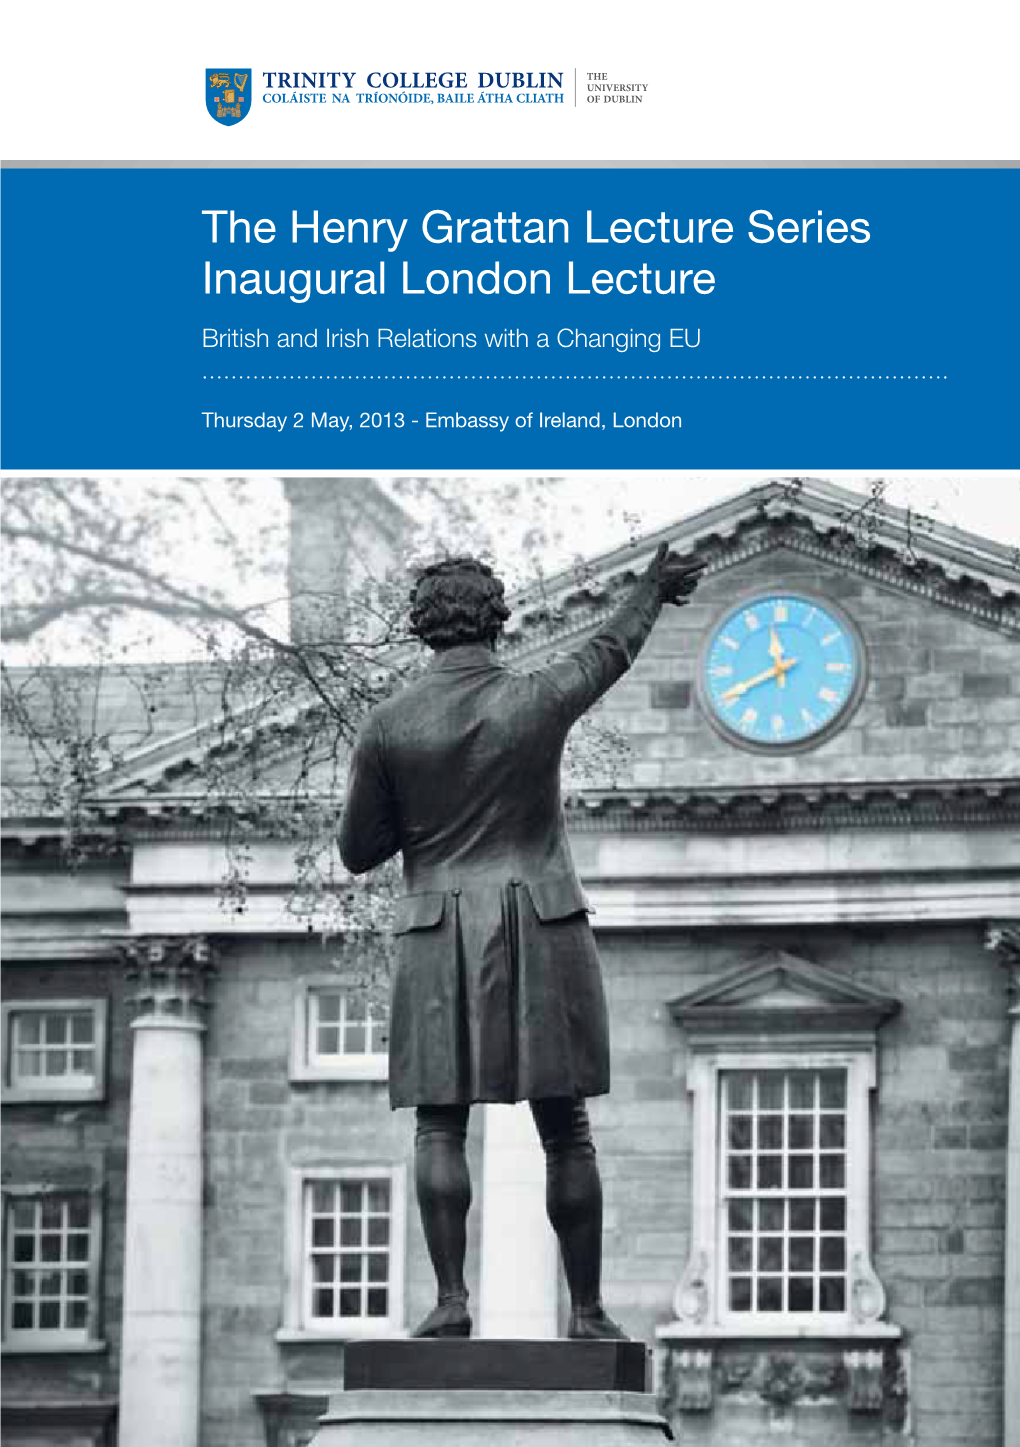 The Henry Grattan Lecture Series Inaugural London Lecture British and Irish Relations with a Changing EU